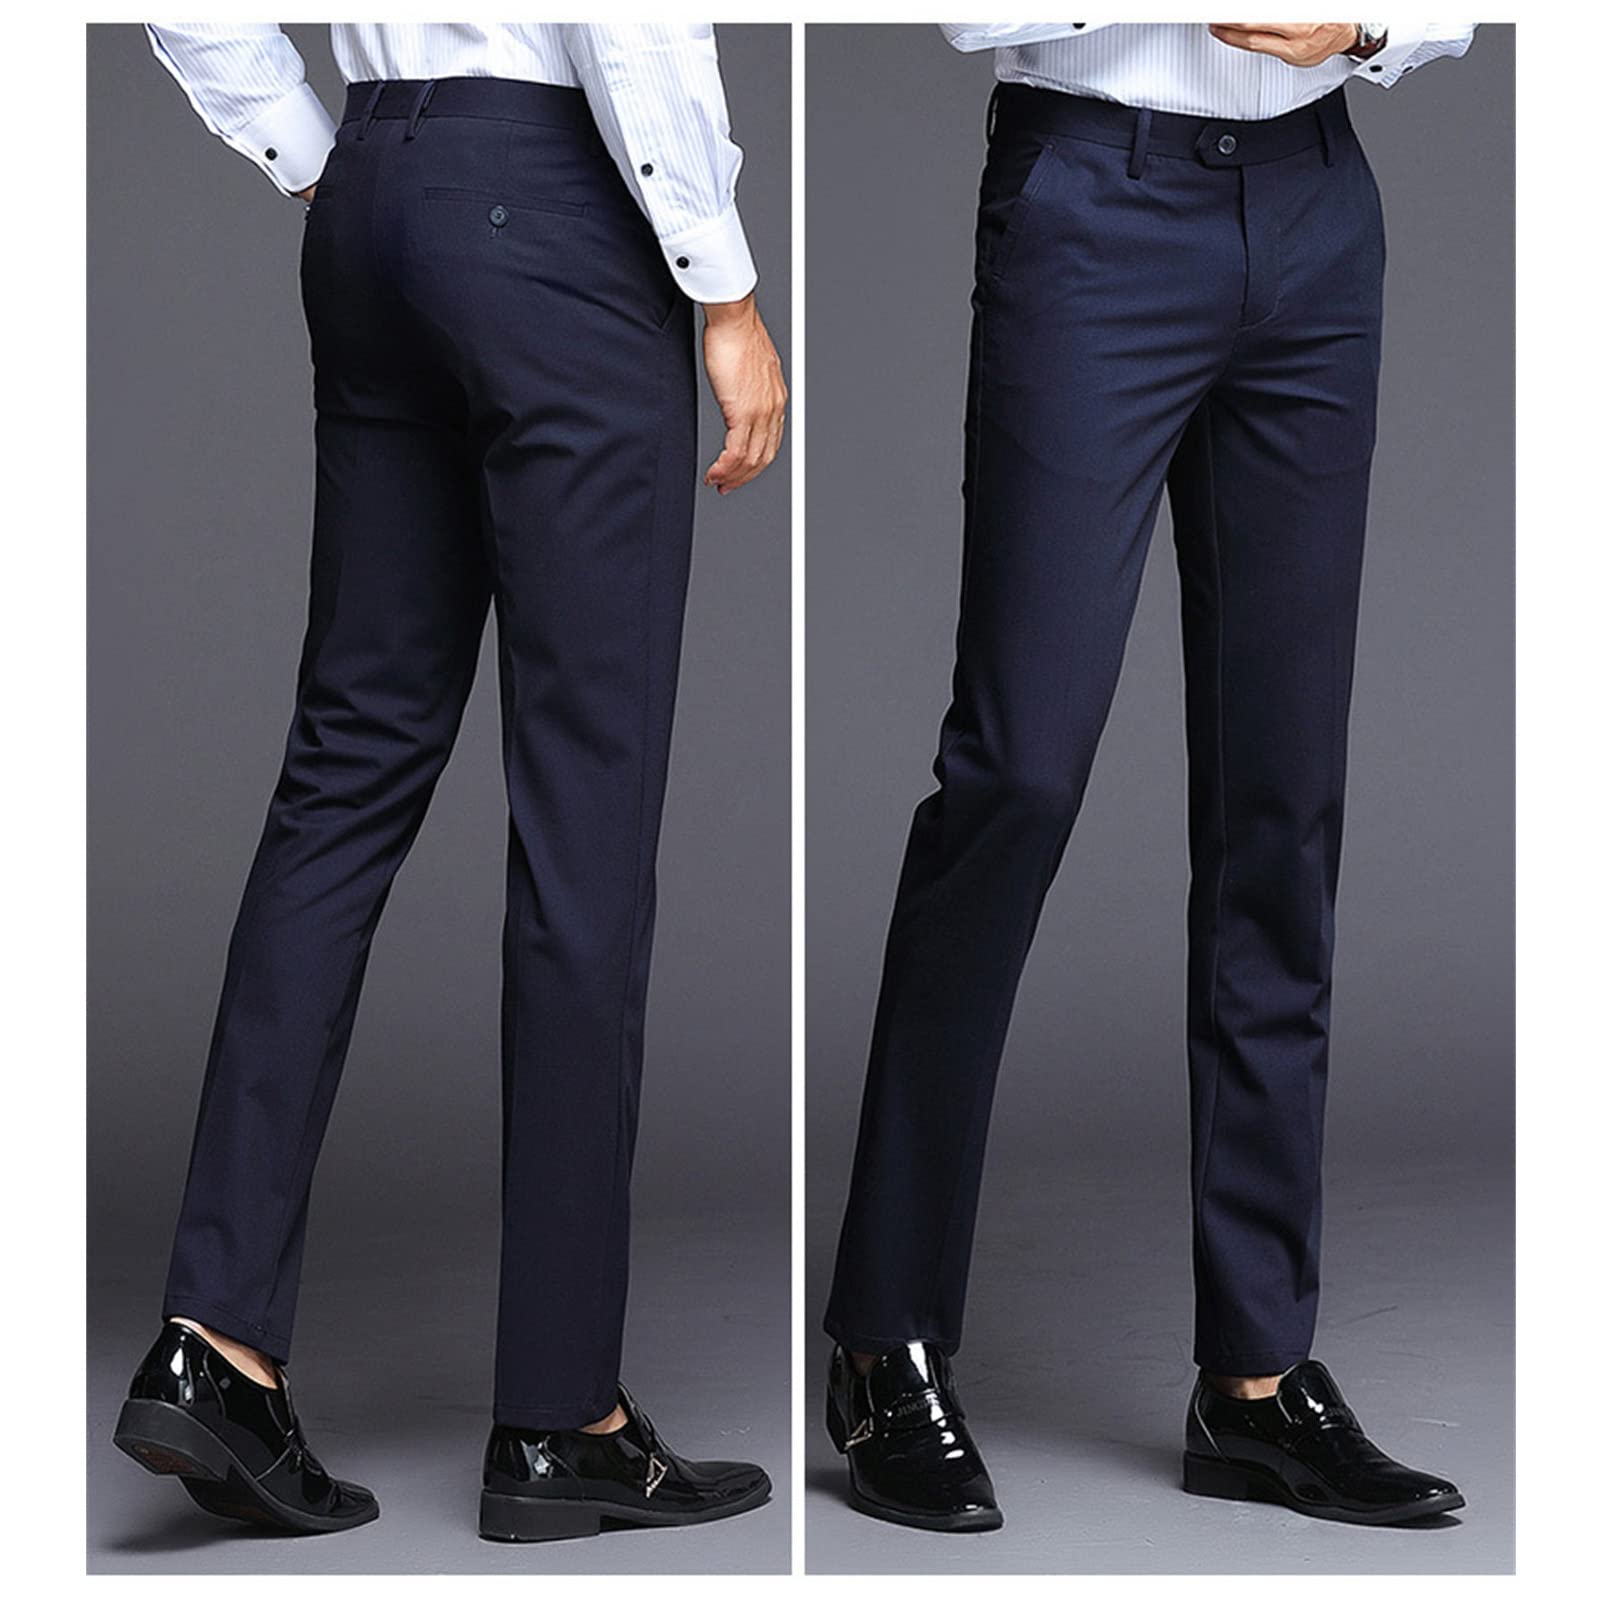 Men's Slim Fit Skinny Stretch Pant Classic Solid Color Tapered Suit Pant Lightweight Business Comfort Trousers (Blue,33)